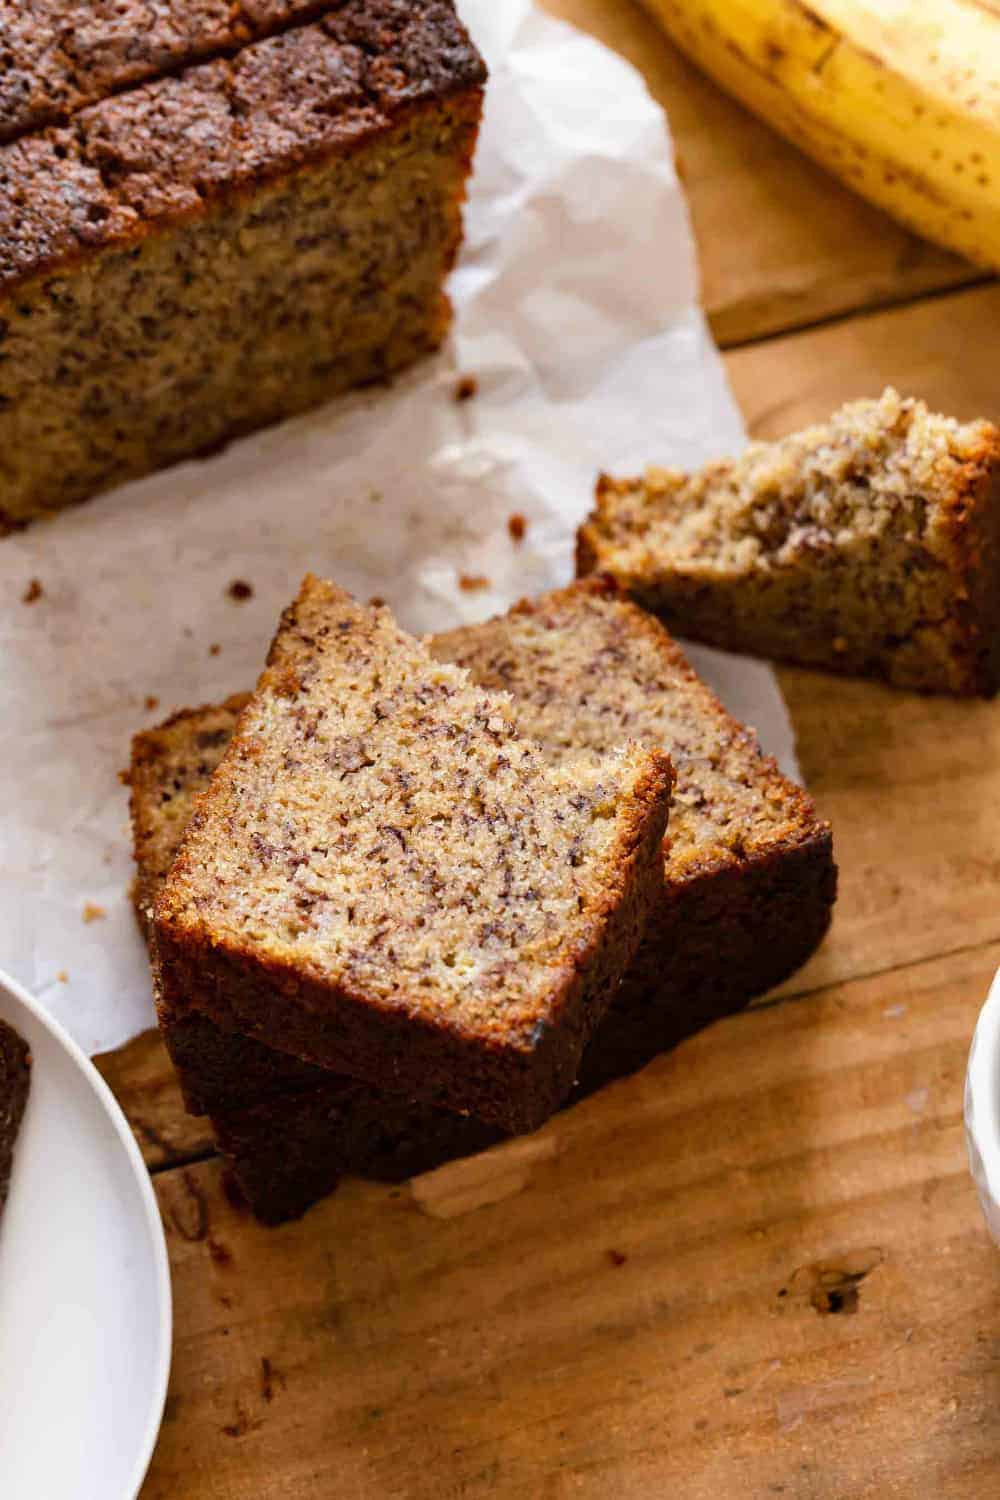 Dominique Ansel's banana bread recipe, sliced and ready to serve